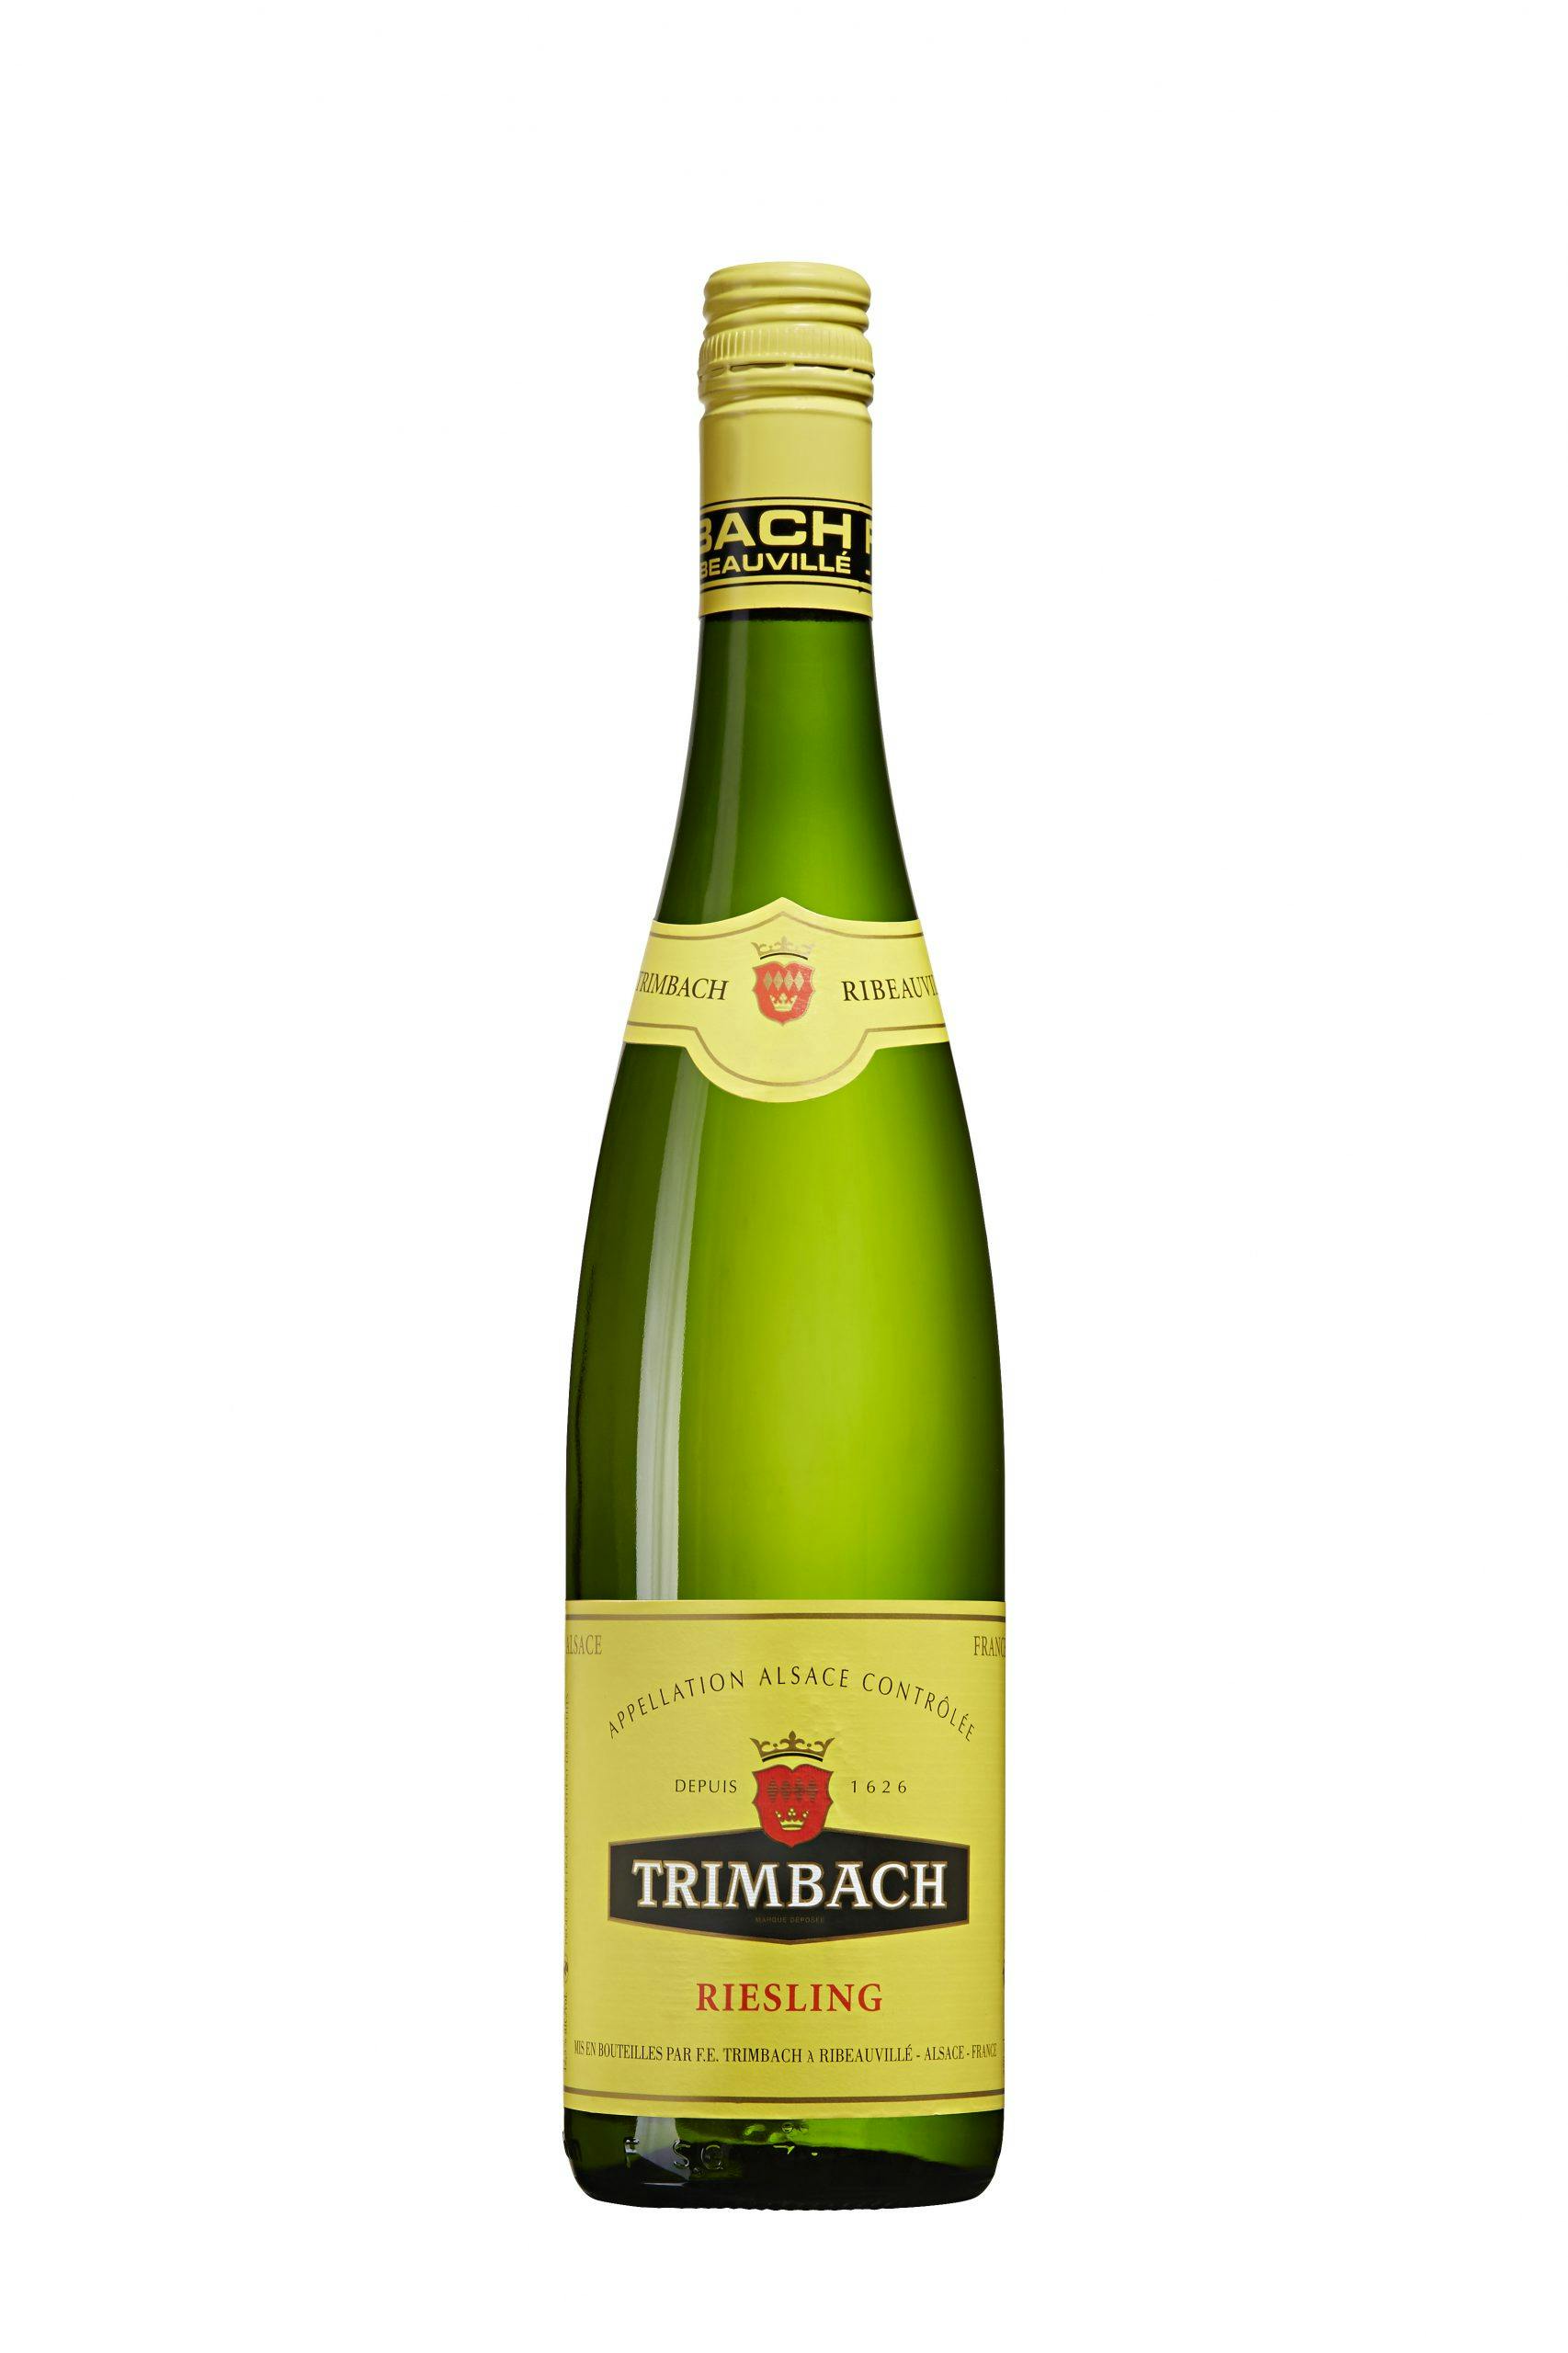 Trimbach riesling